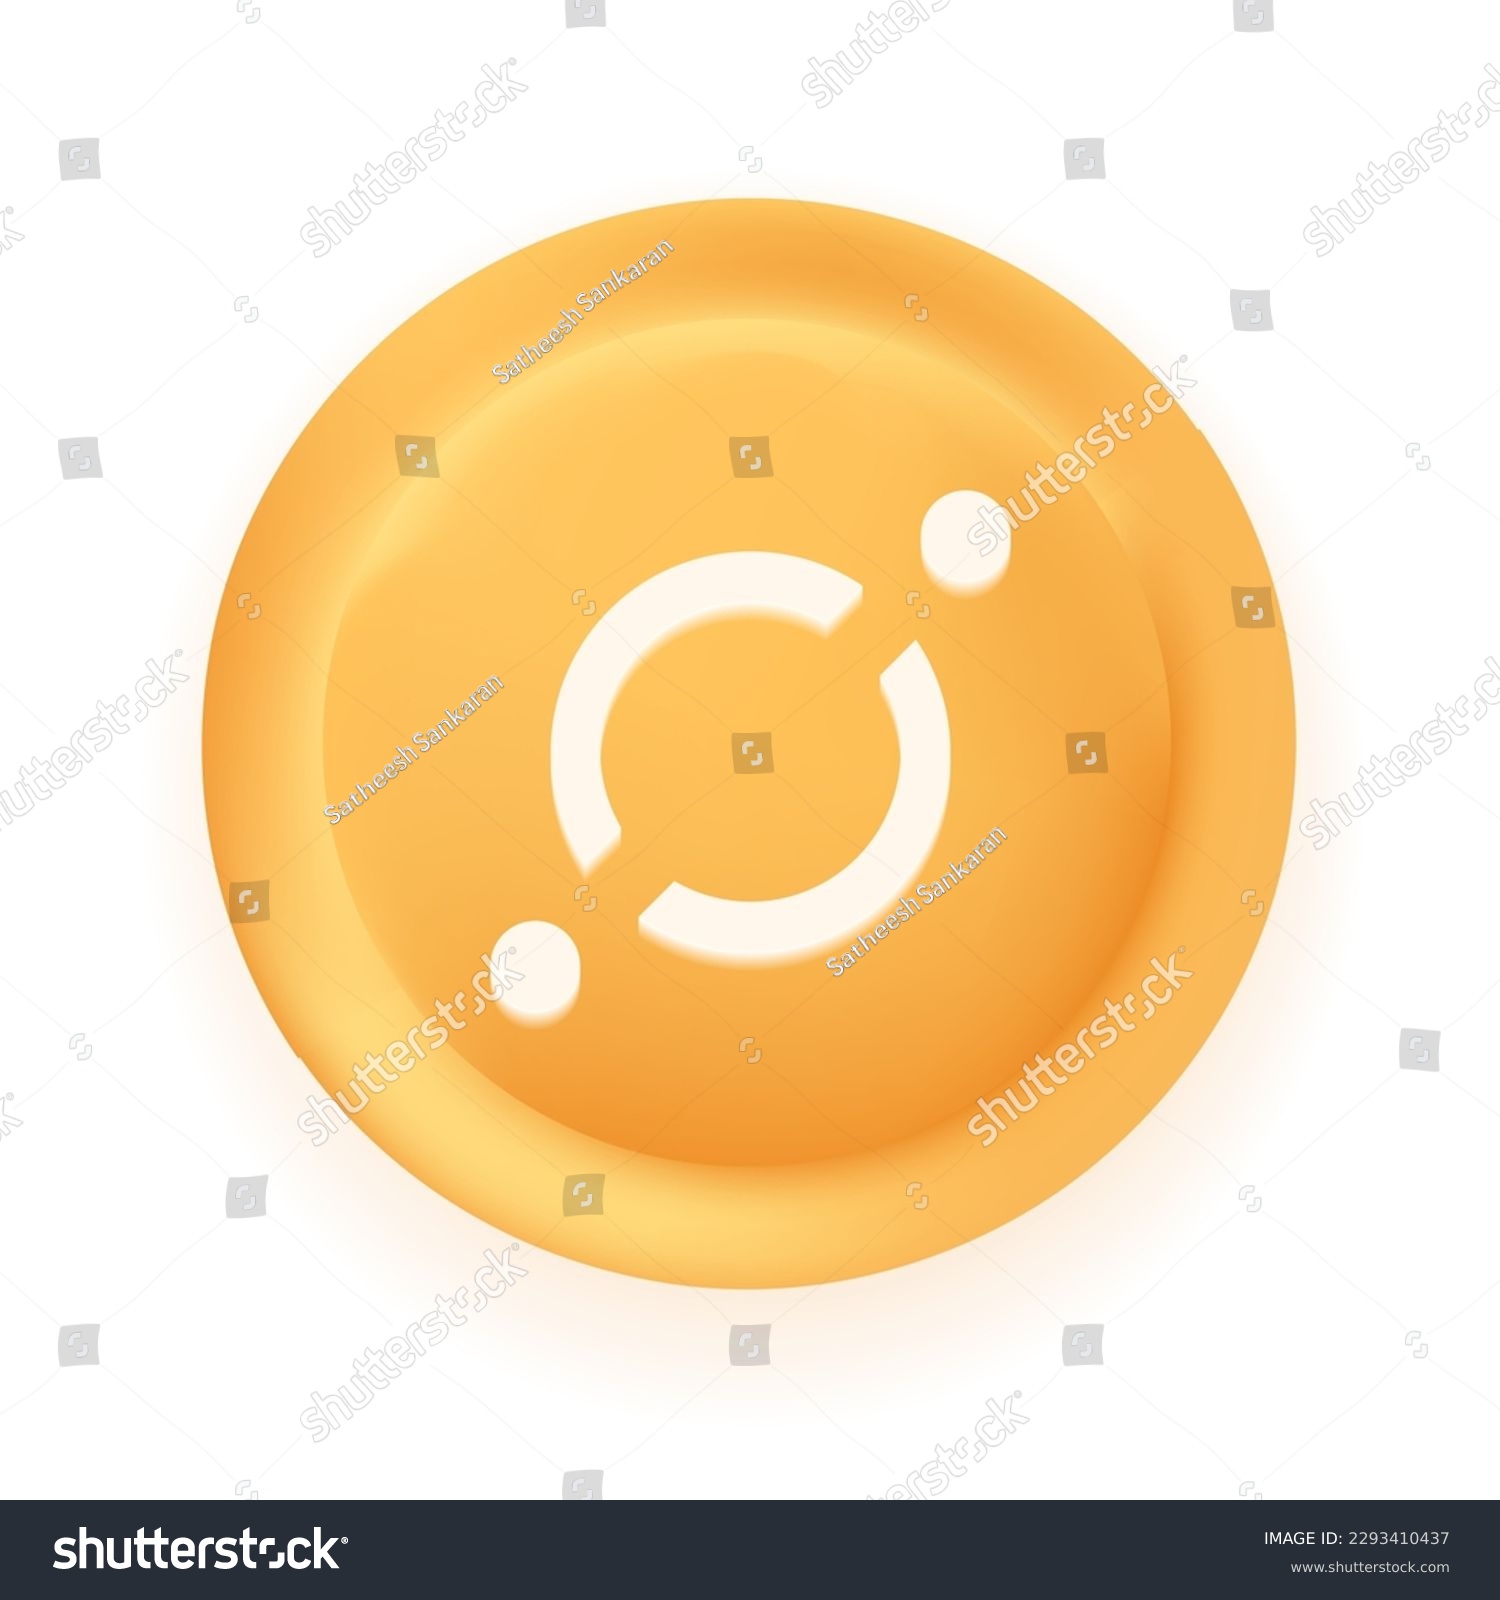 SVG of Icon (ICX) crypto currency 3D coin vector illustration isolated on white background. Can be used as virtual money icon, logo, emblem, sticker and badge designs. svg